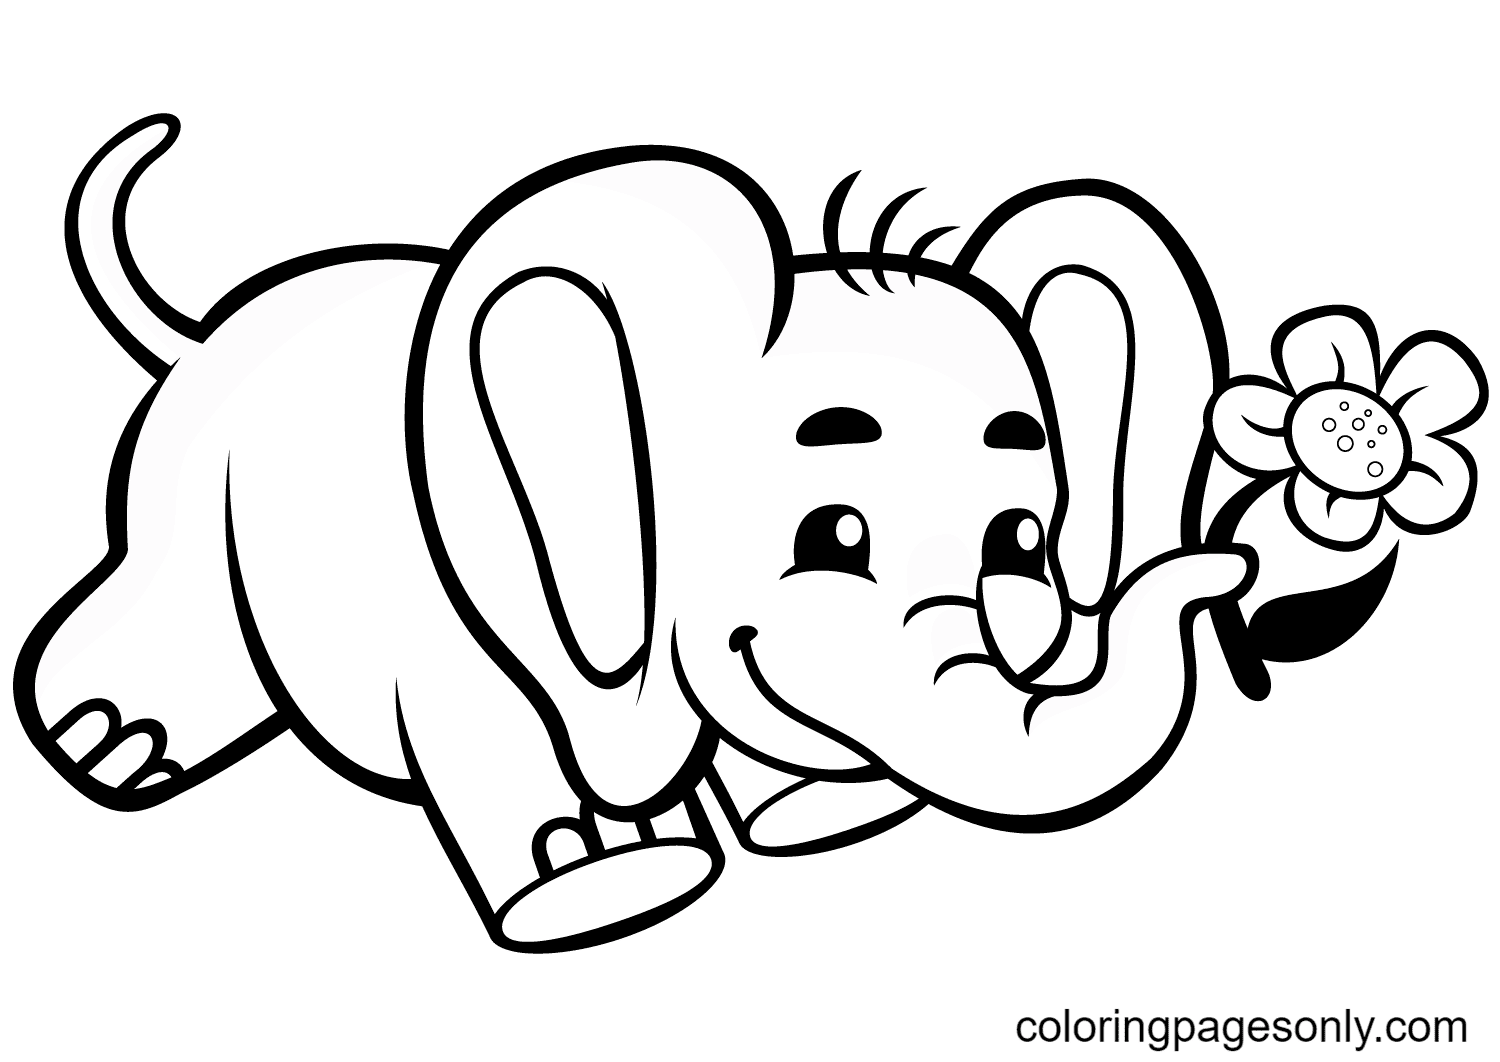 Baby Elephant Use Its Nose Holds a Flower Coloring Page